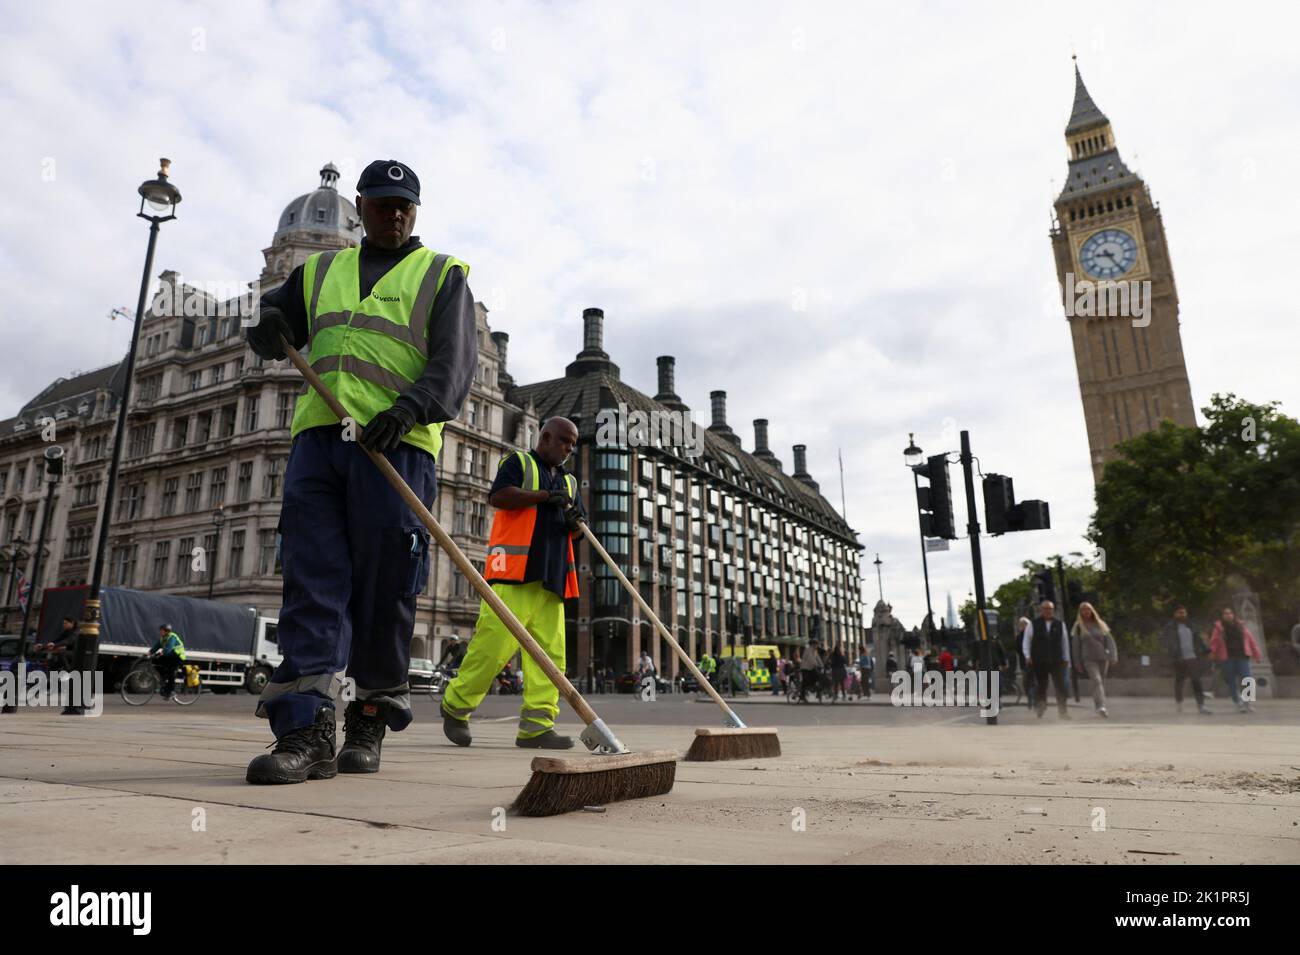 Cleaners sweep the streets in Parliament Square, following the funeral of Britain's Queen Elizabeth, in London, Britain September 20, 2022. REUTERS/Tom Nicholson Stock Photo